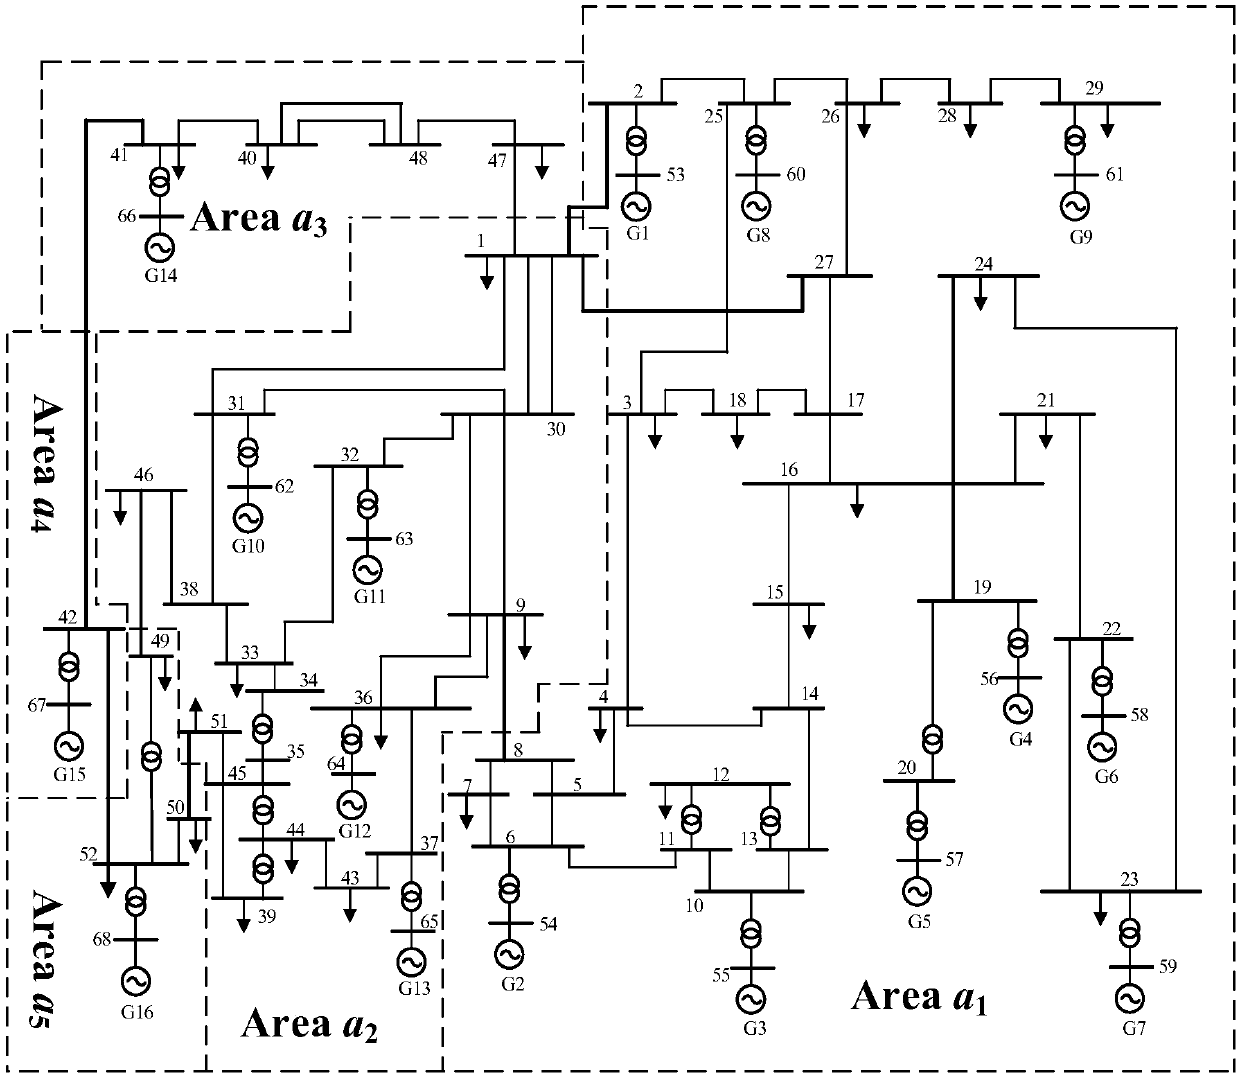 APIT-MEMD-based electric power system low-frequency oscillation mode identification method